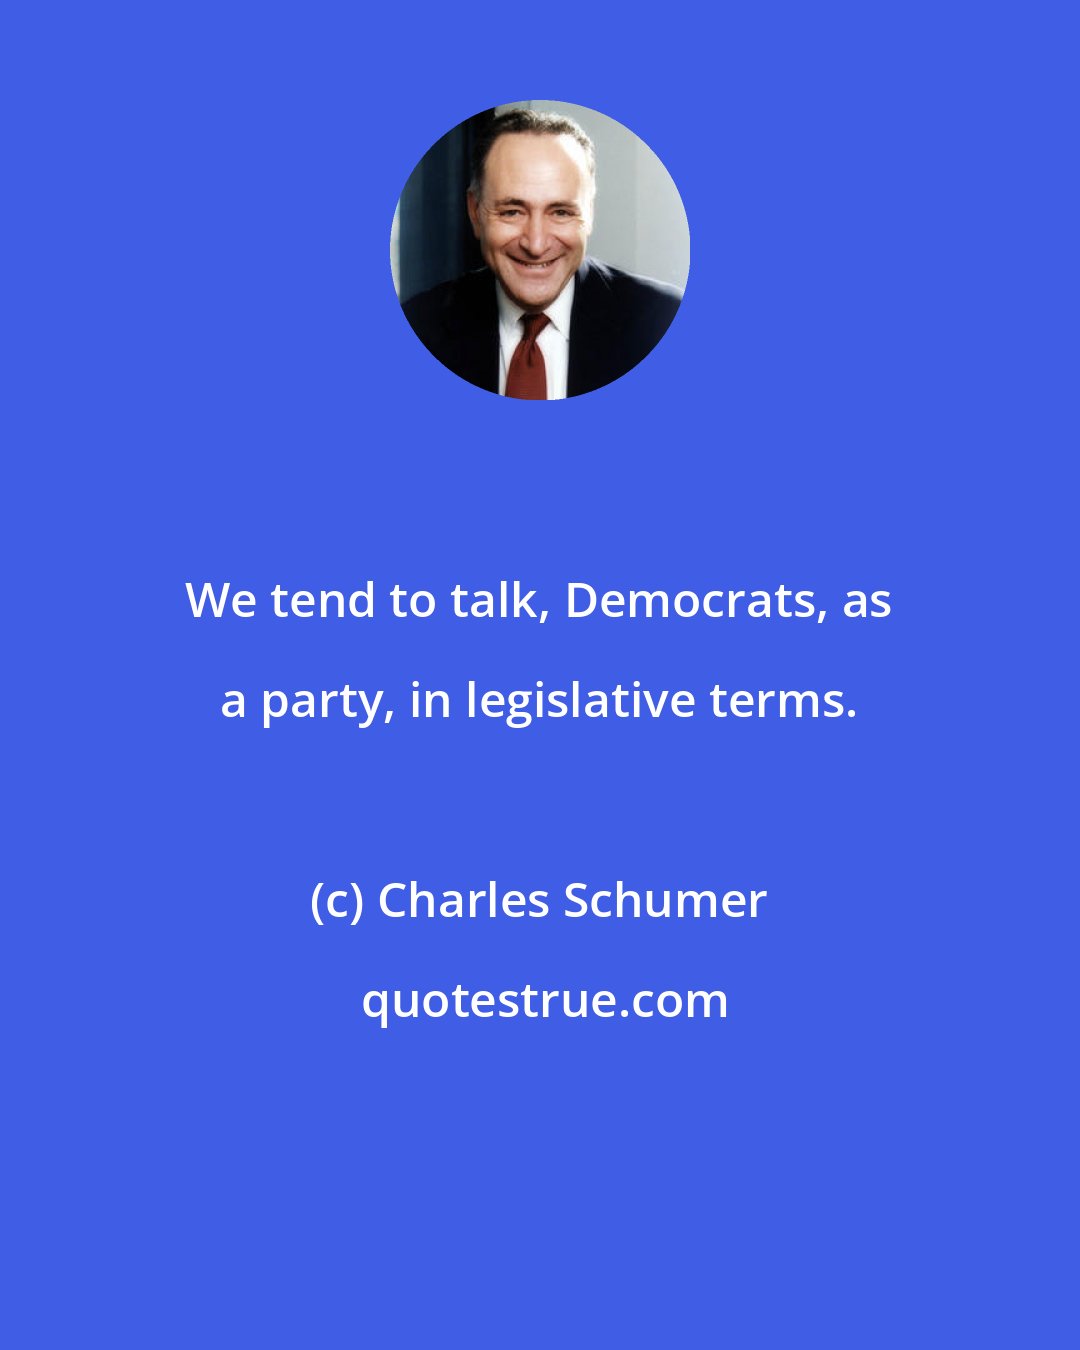 Charles Schumer: We tend to talk, Democrats, as a party, in legislative terms.